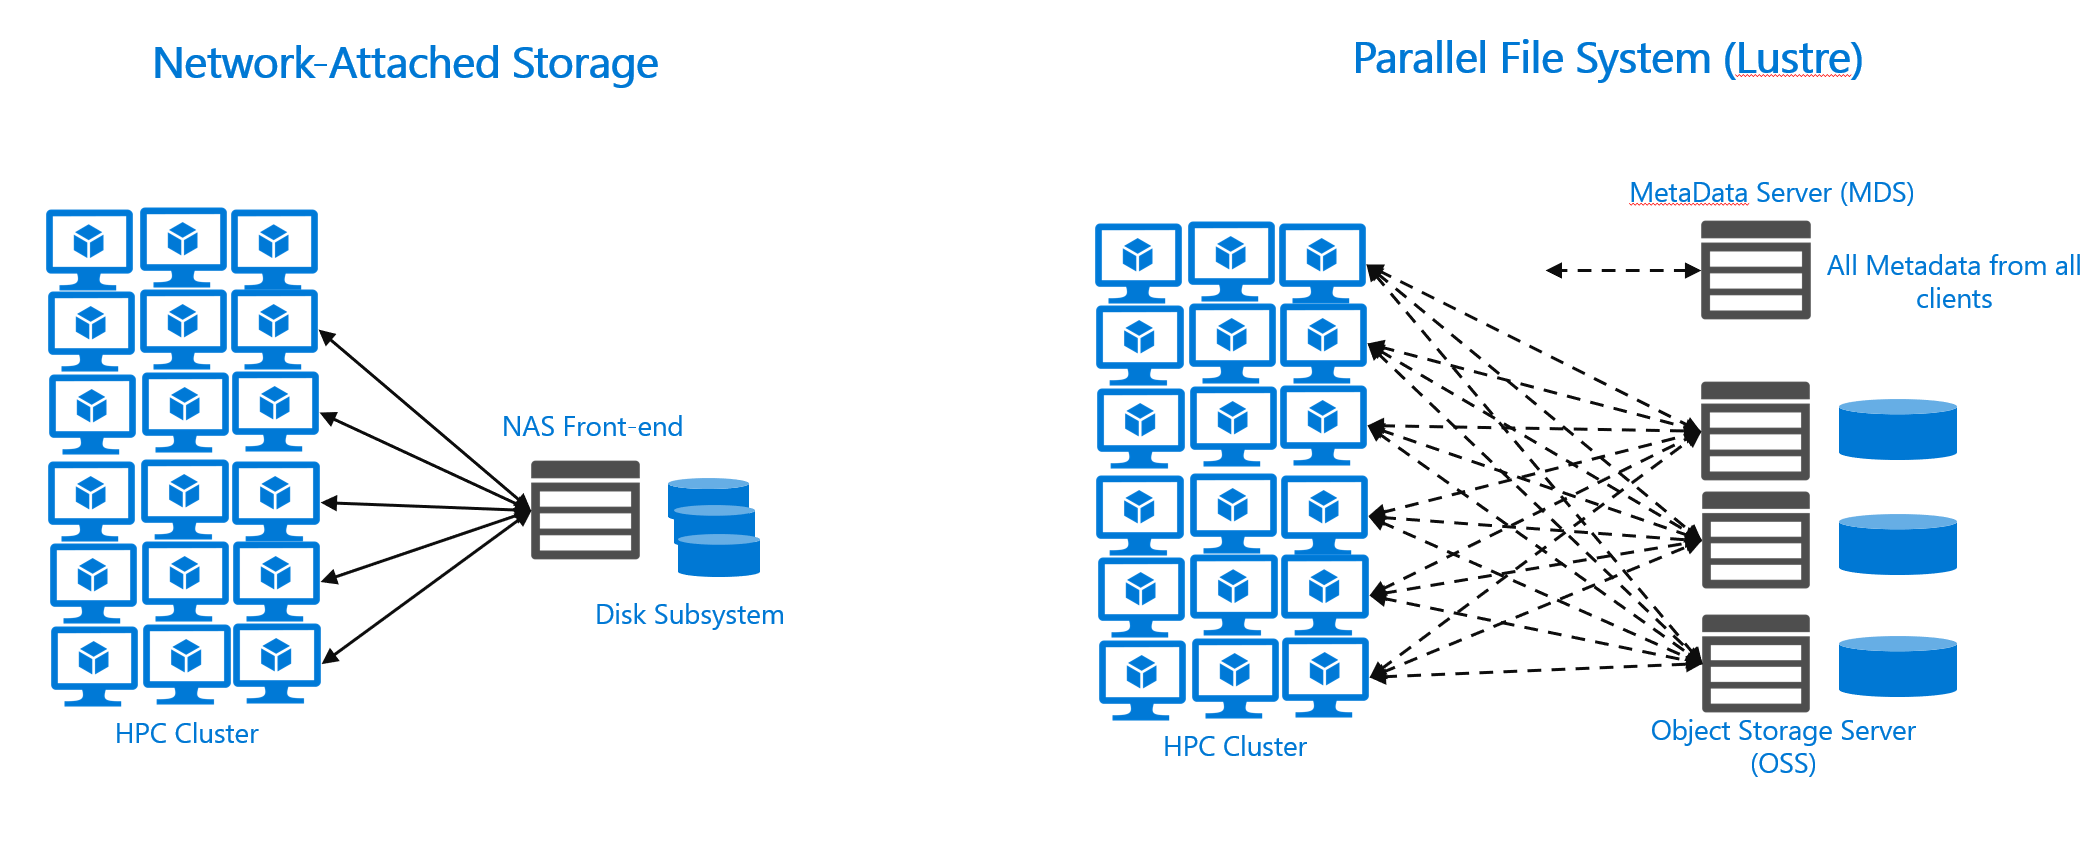 Diagram that compares network-attached storage and parallel file system architectures.